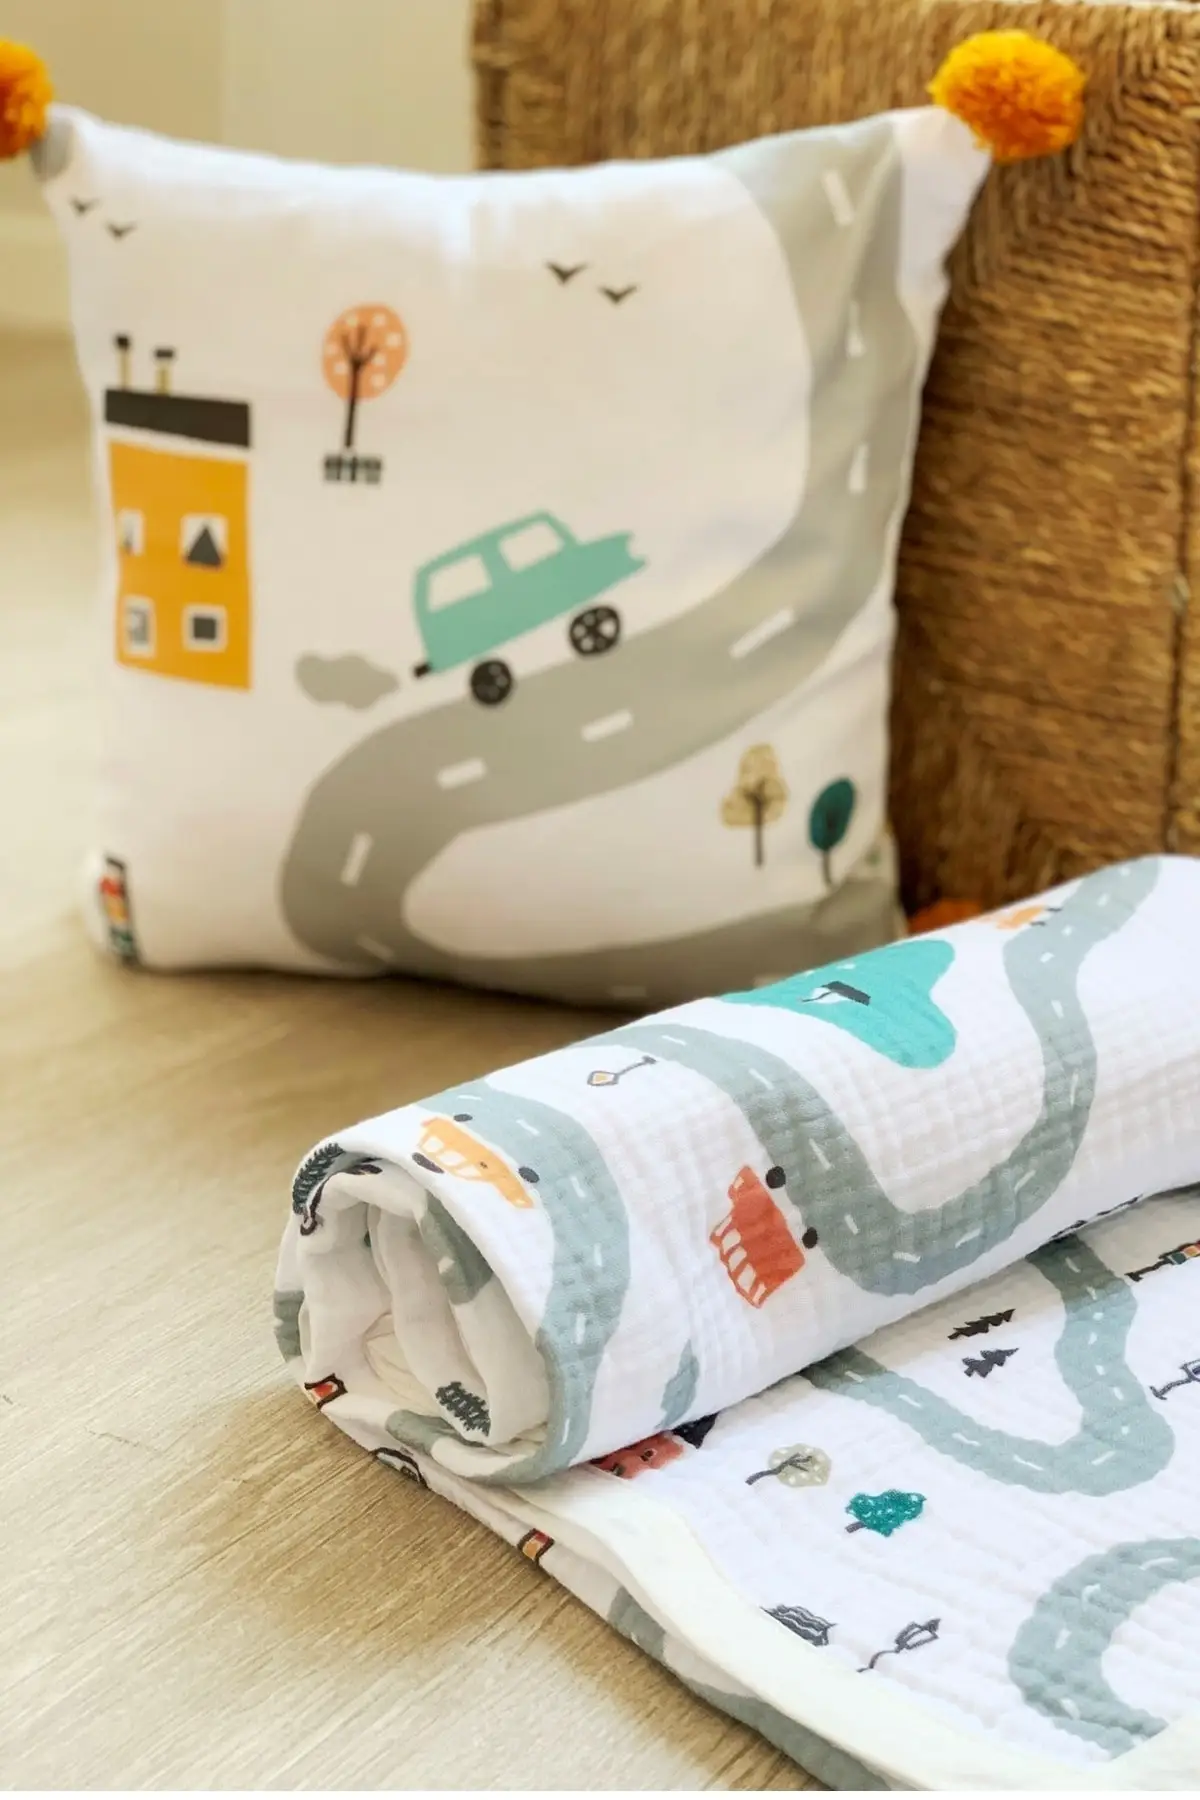 Traffic Organic Cotton Pillow decorate and 4 Floor Müslin Blanket Baby Gift Mother & Kids